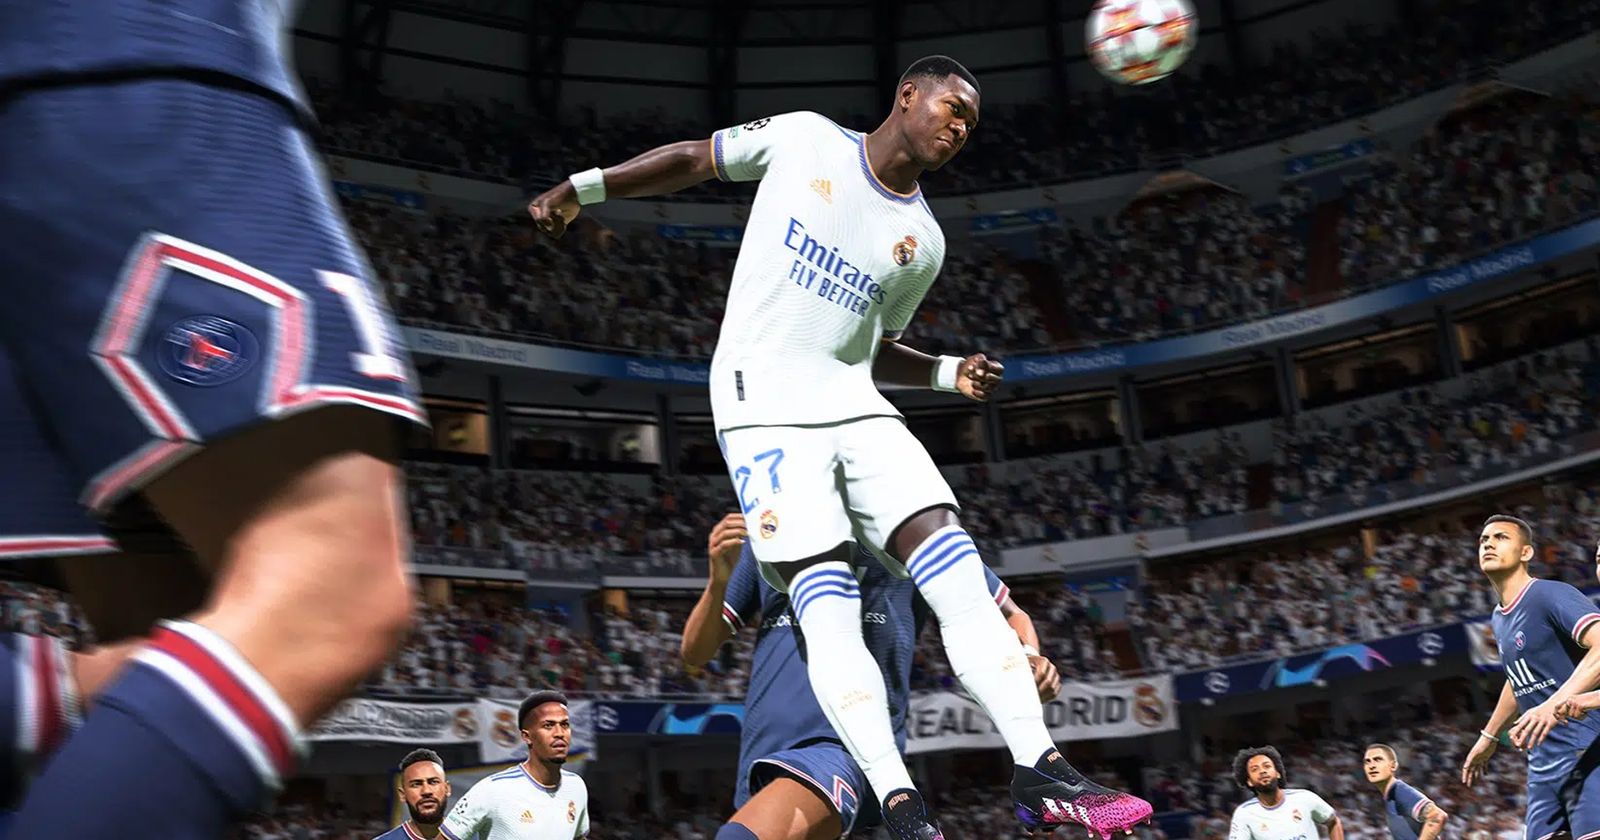 FIFA 23 Early Web App and Companion App Release Date on September